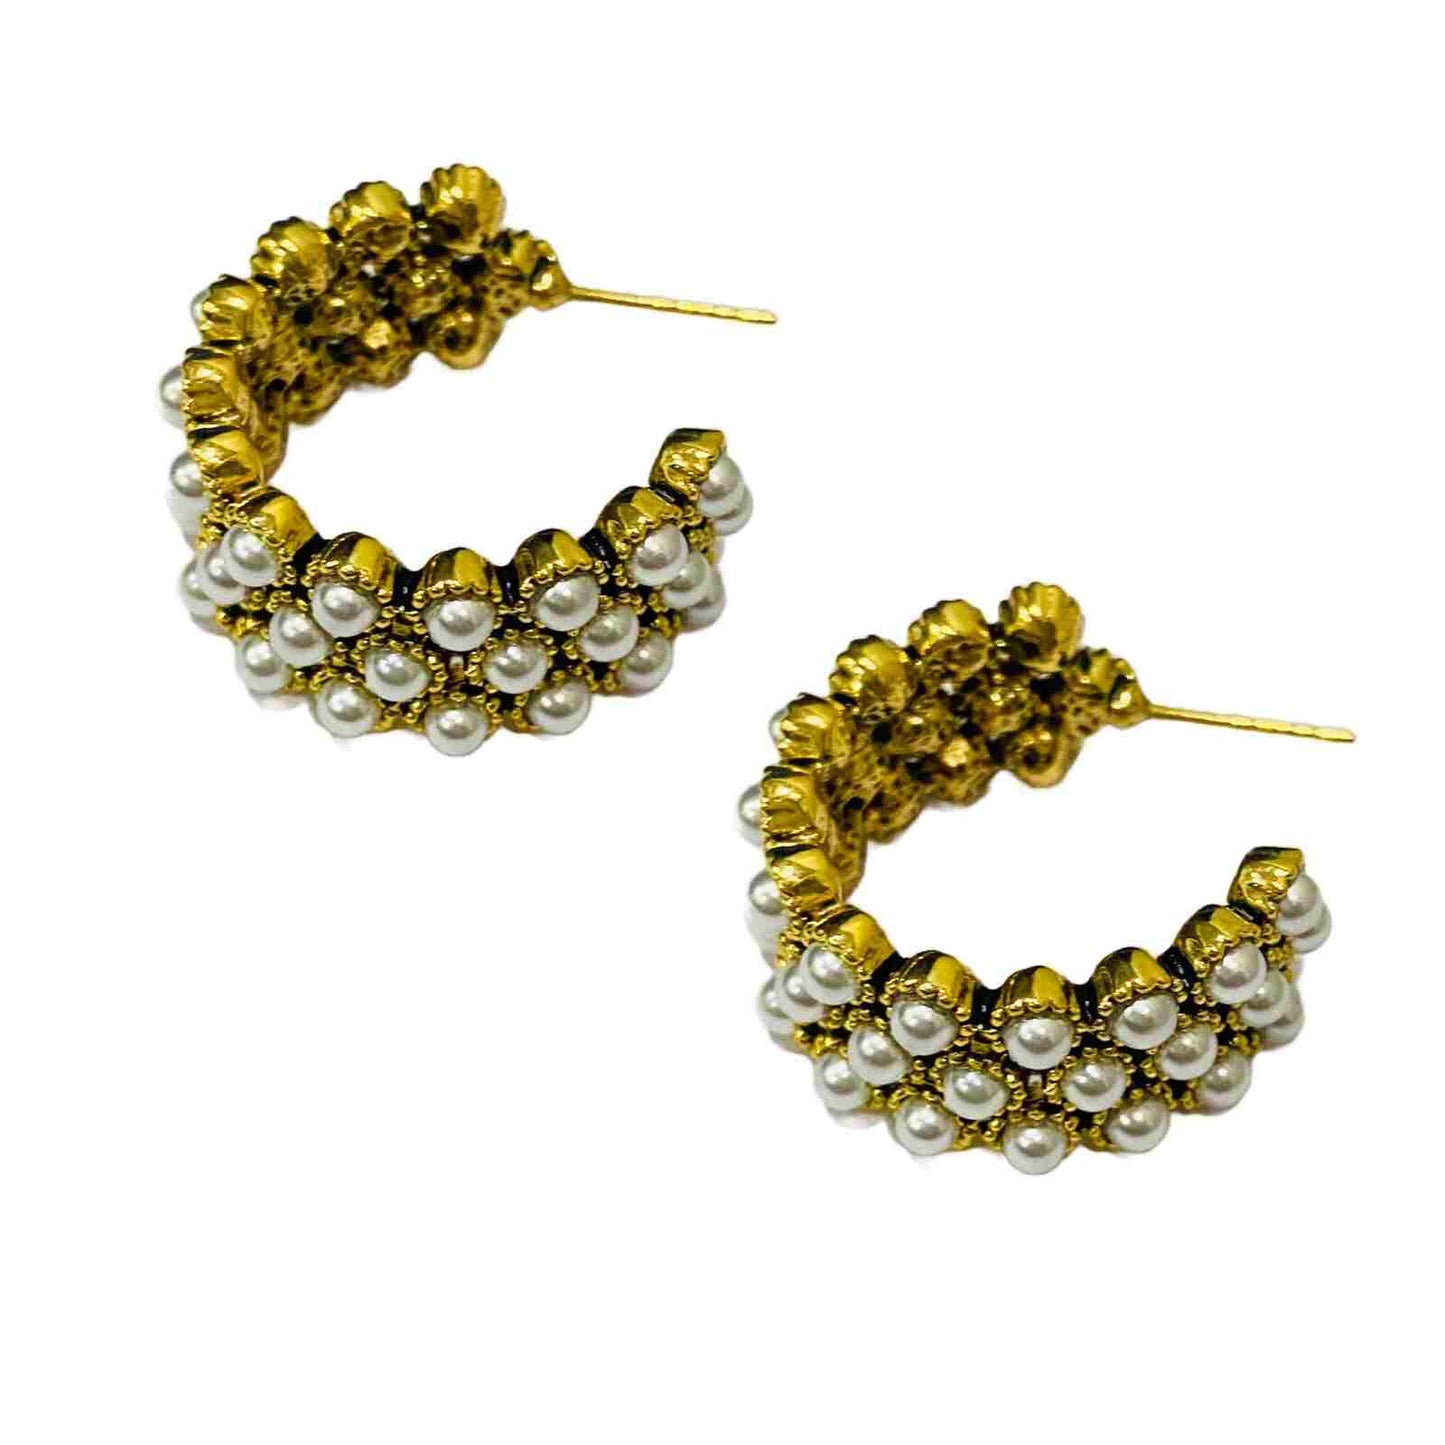 Pearl Studs | Gold Plated Earrings for Women | Artificial Jewelry